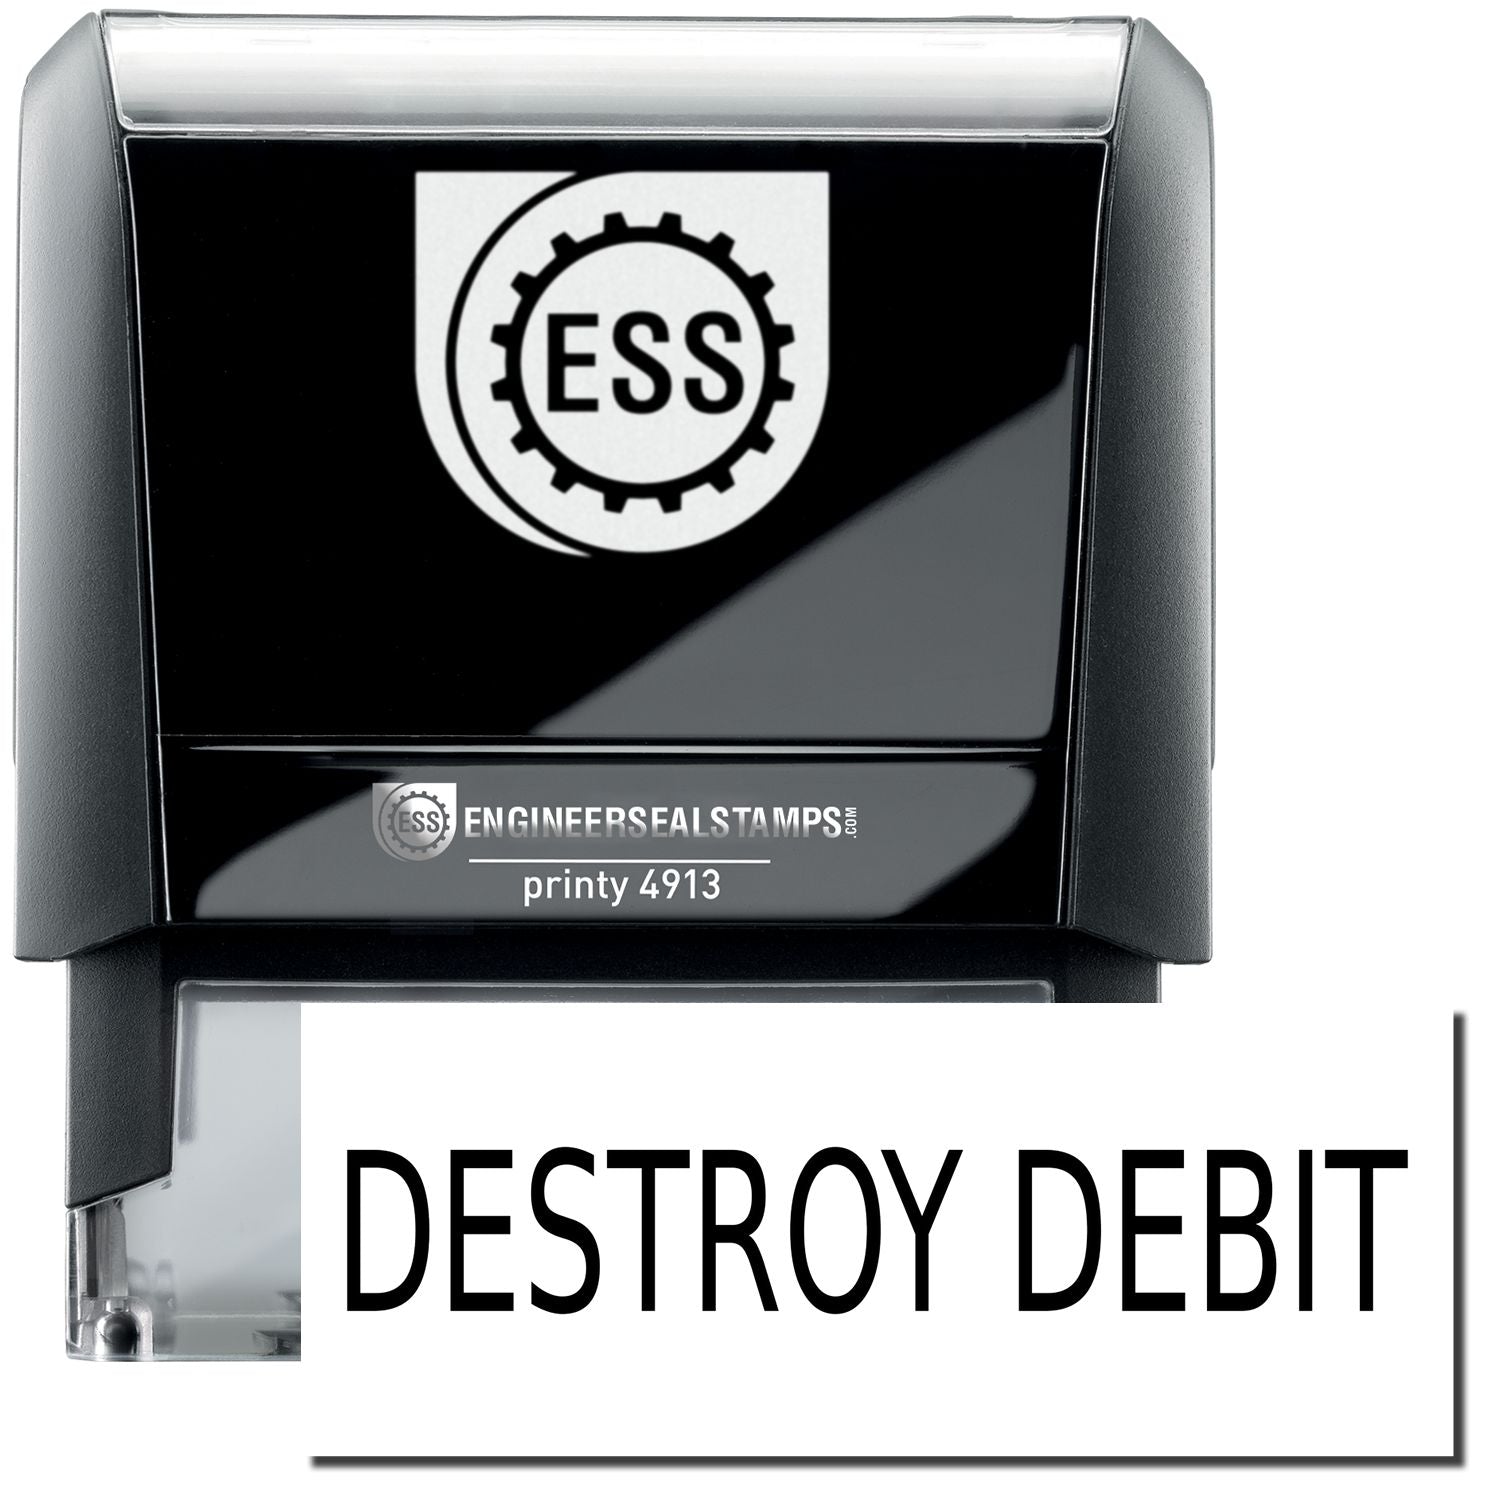 A self-inking stamp with a stamped image showing how the text "DESTROY DEBIT" in a large bold font is displayed by it.